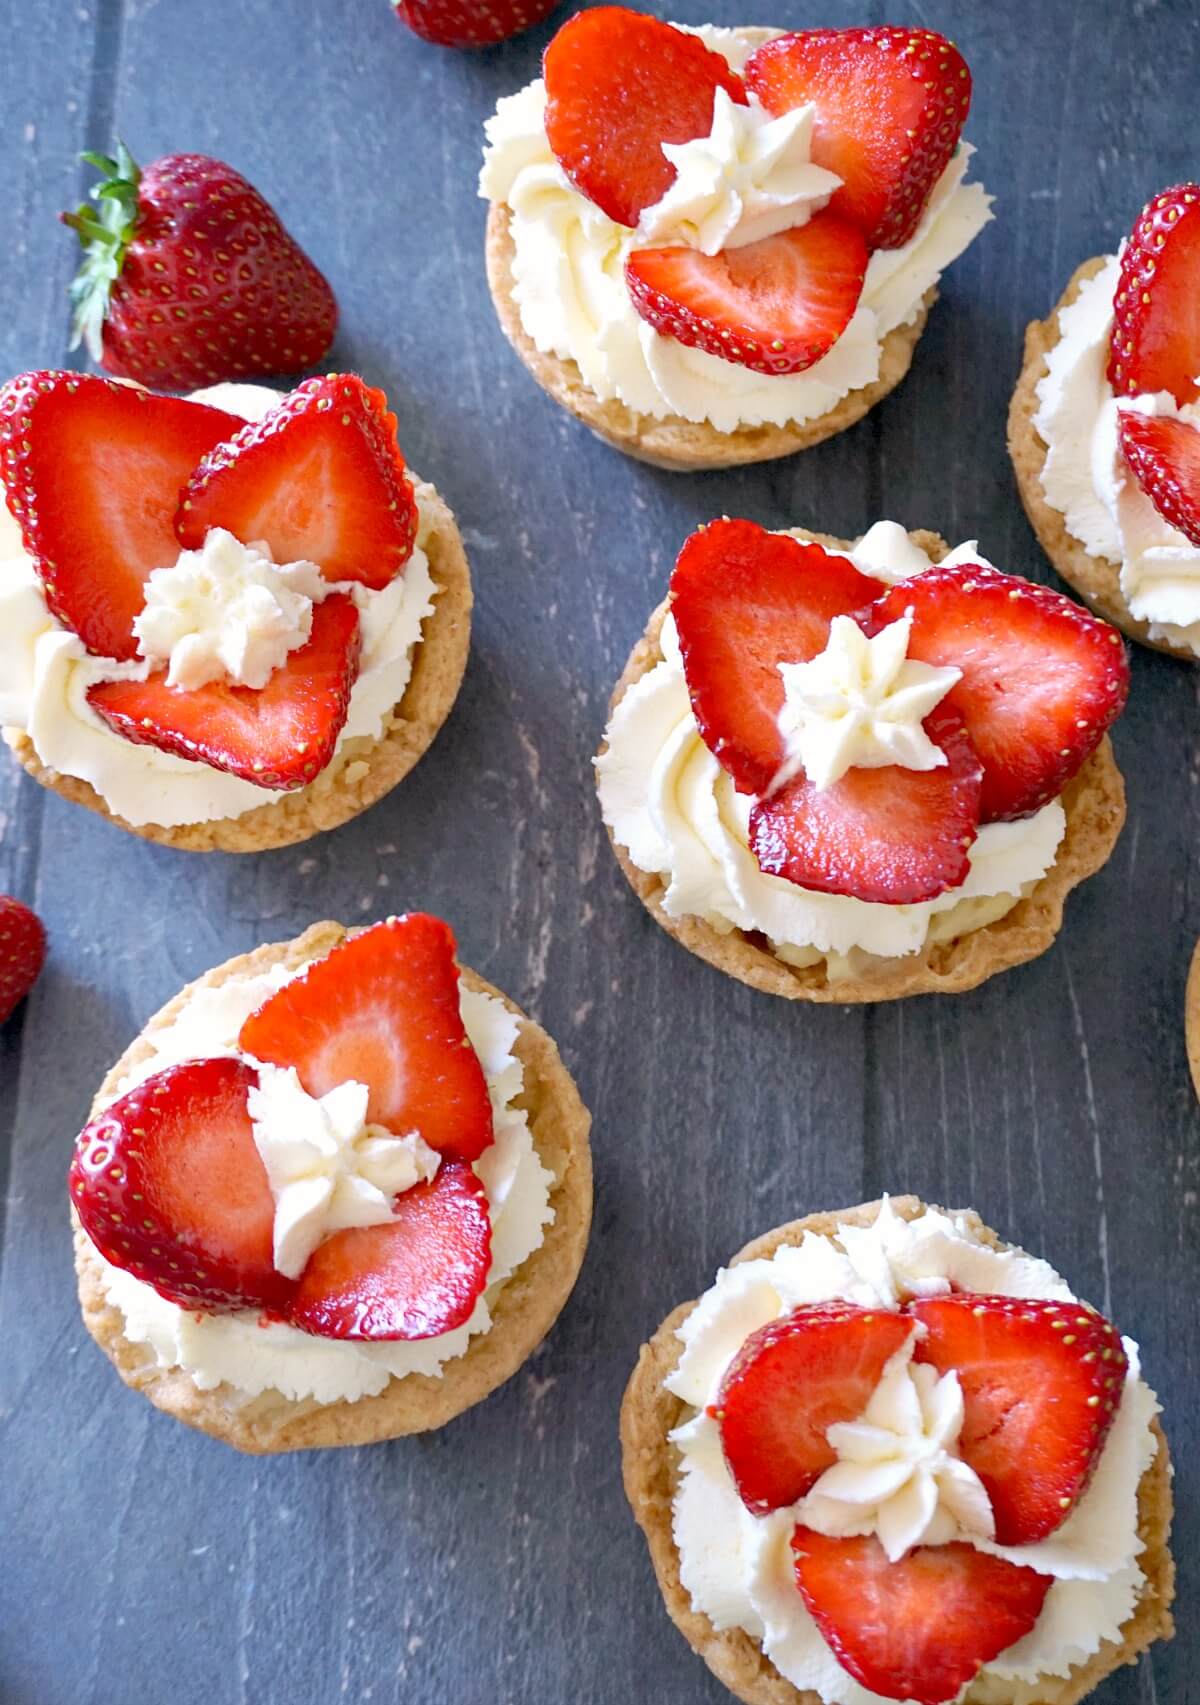 Overhead shoot of 6 strawberry and cream tartlets